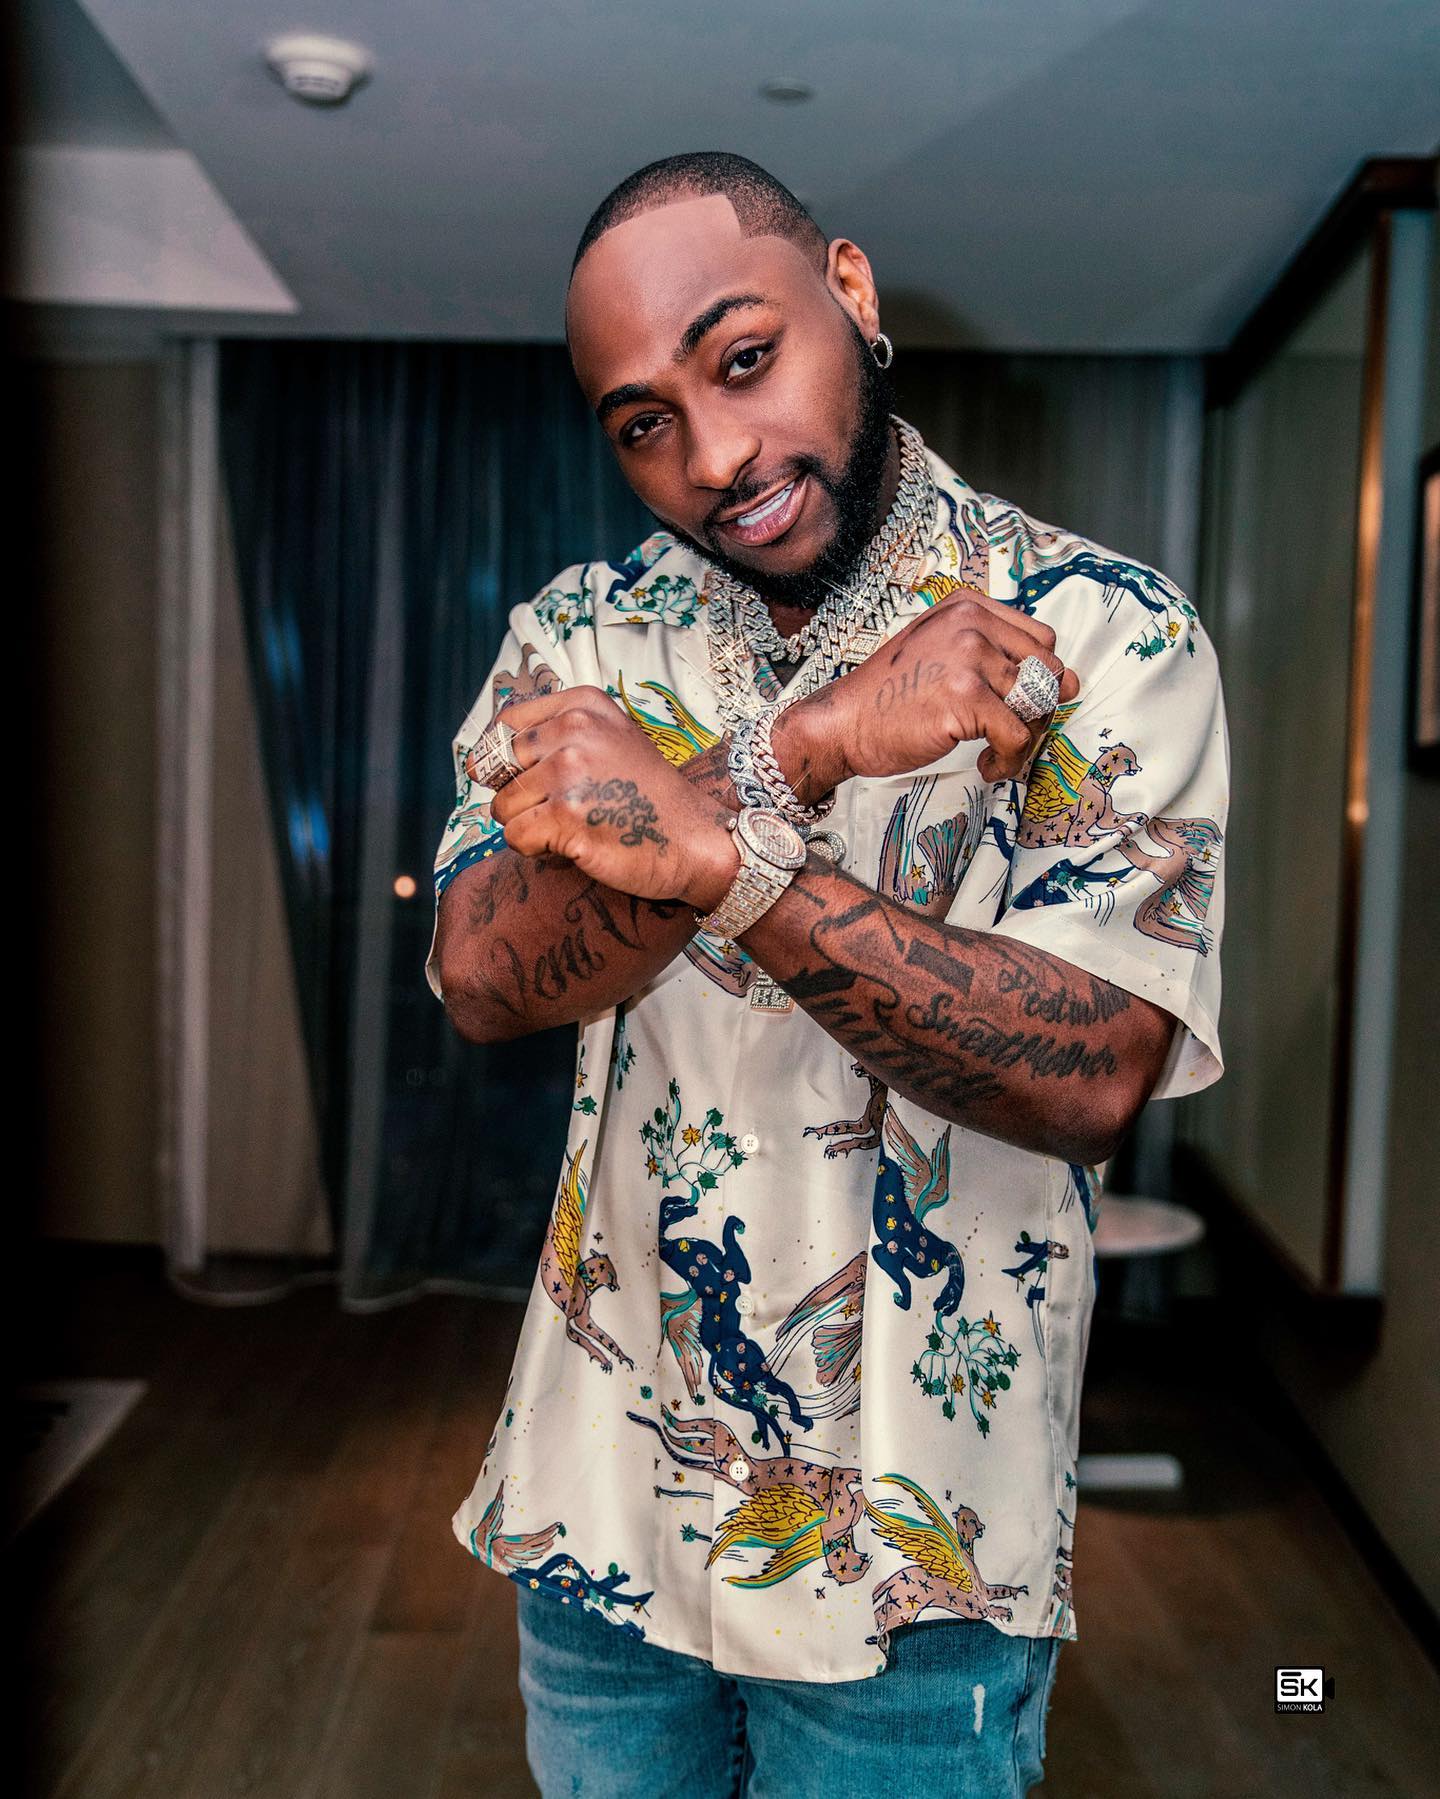 DAVIDO RELEASES ‘STAND STRONG’ FEATURING THE SAMPLES CHOIR